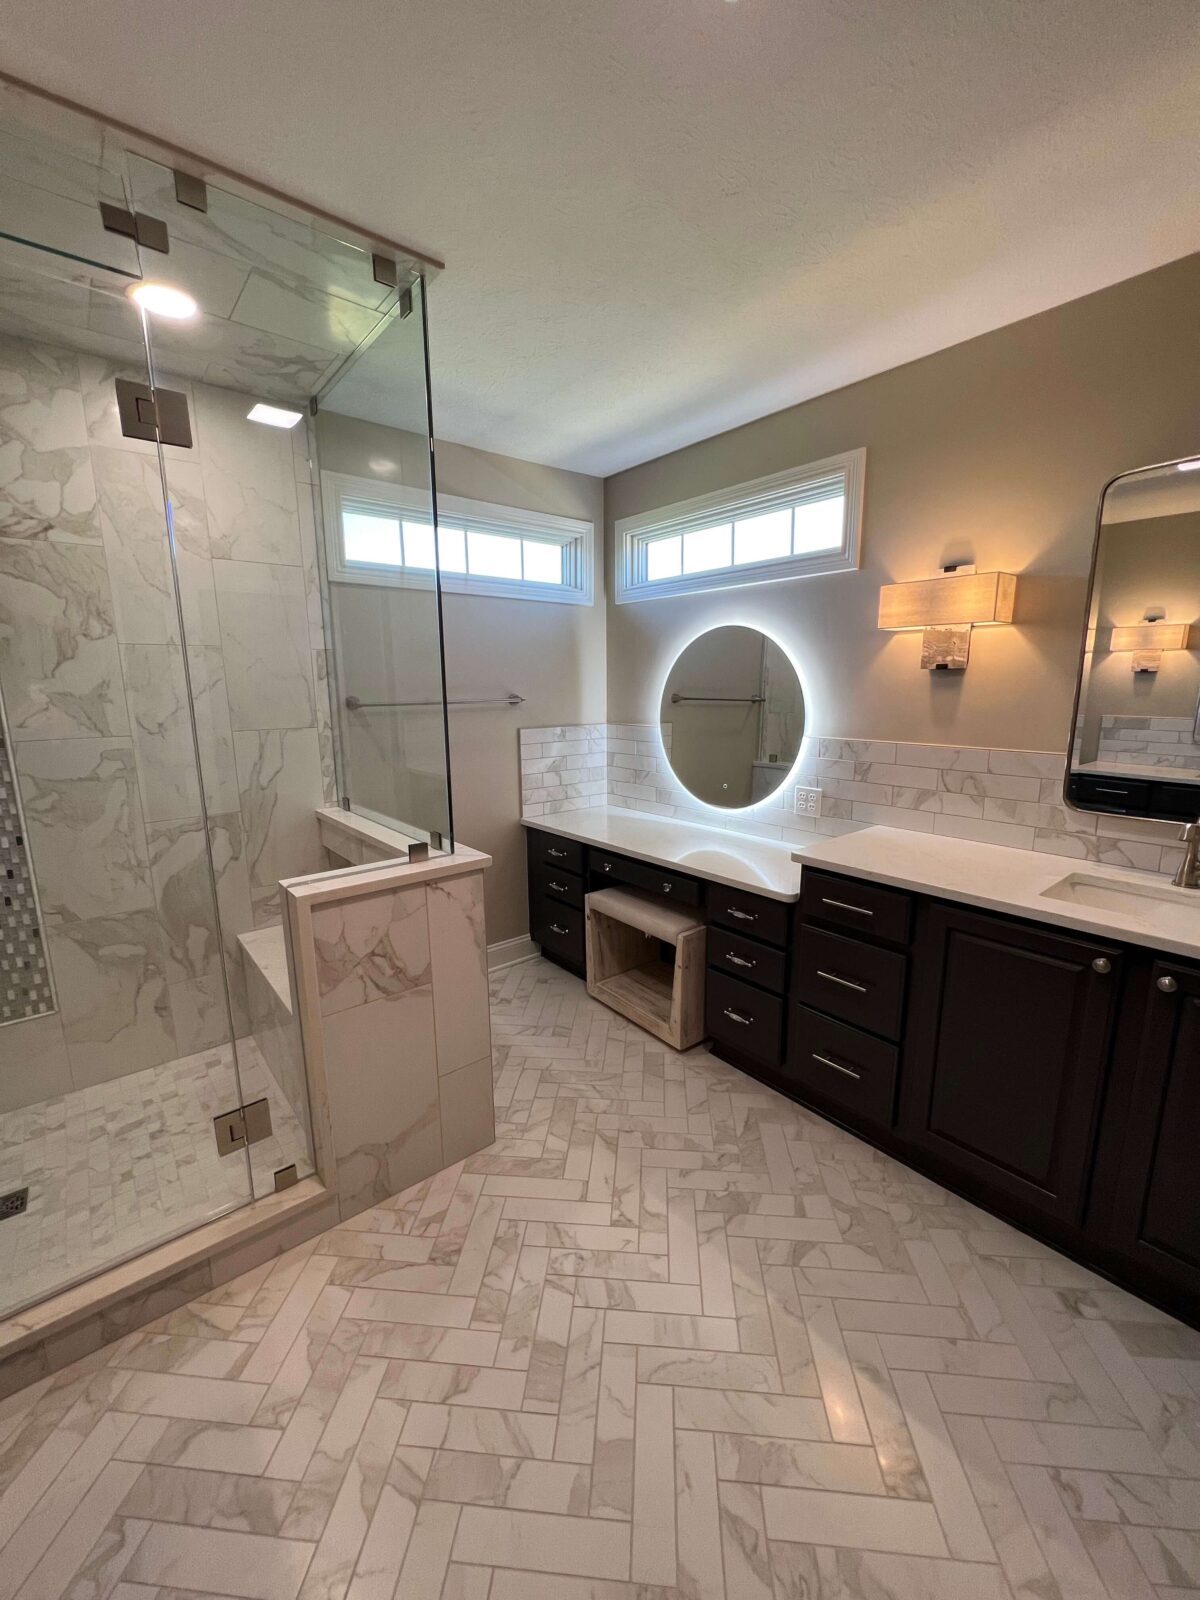 Bathroom Design & Remodeling Tips and Advice